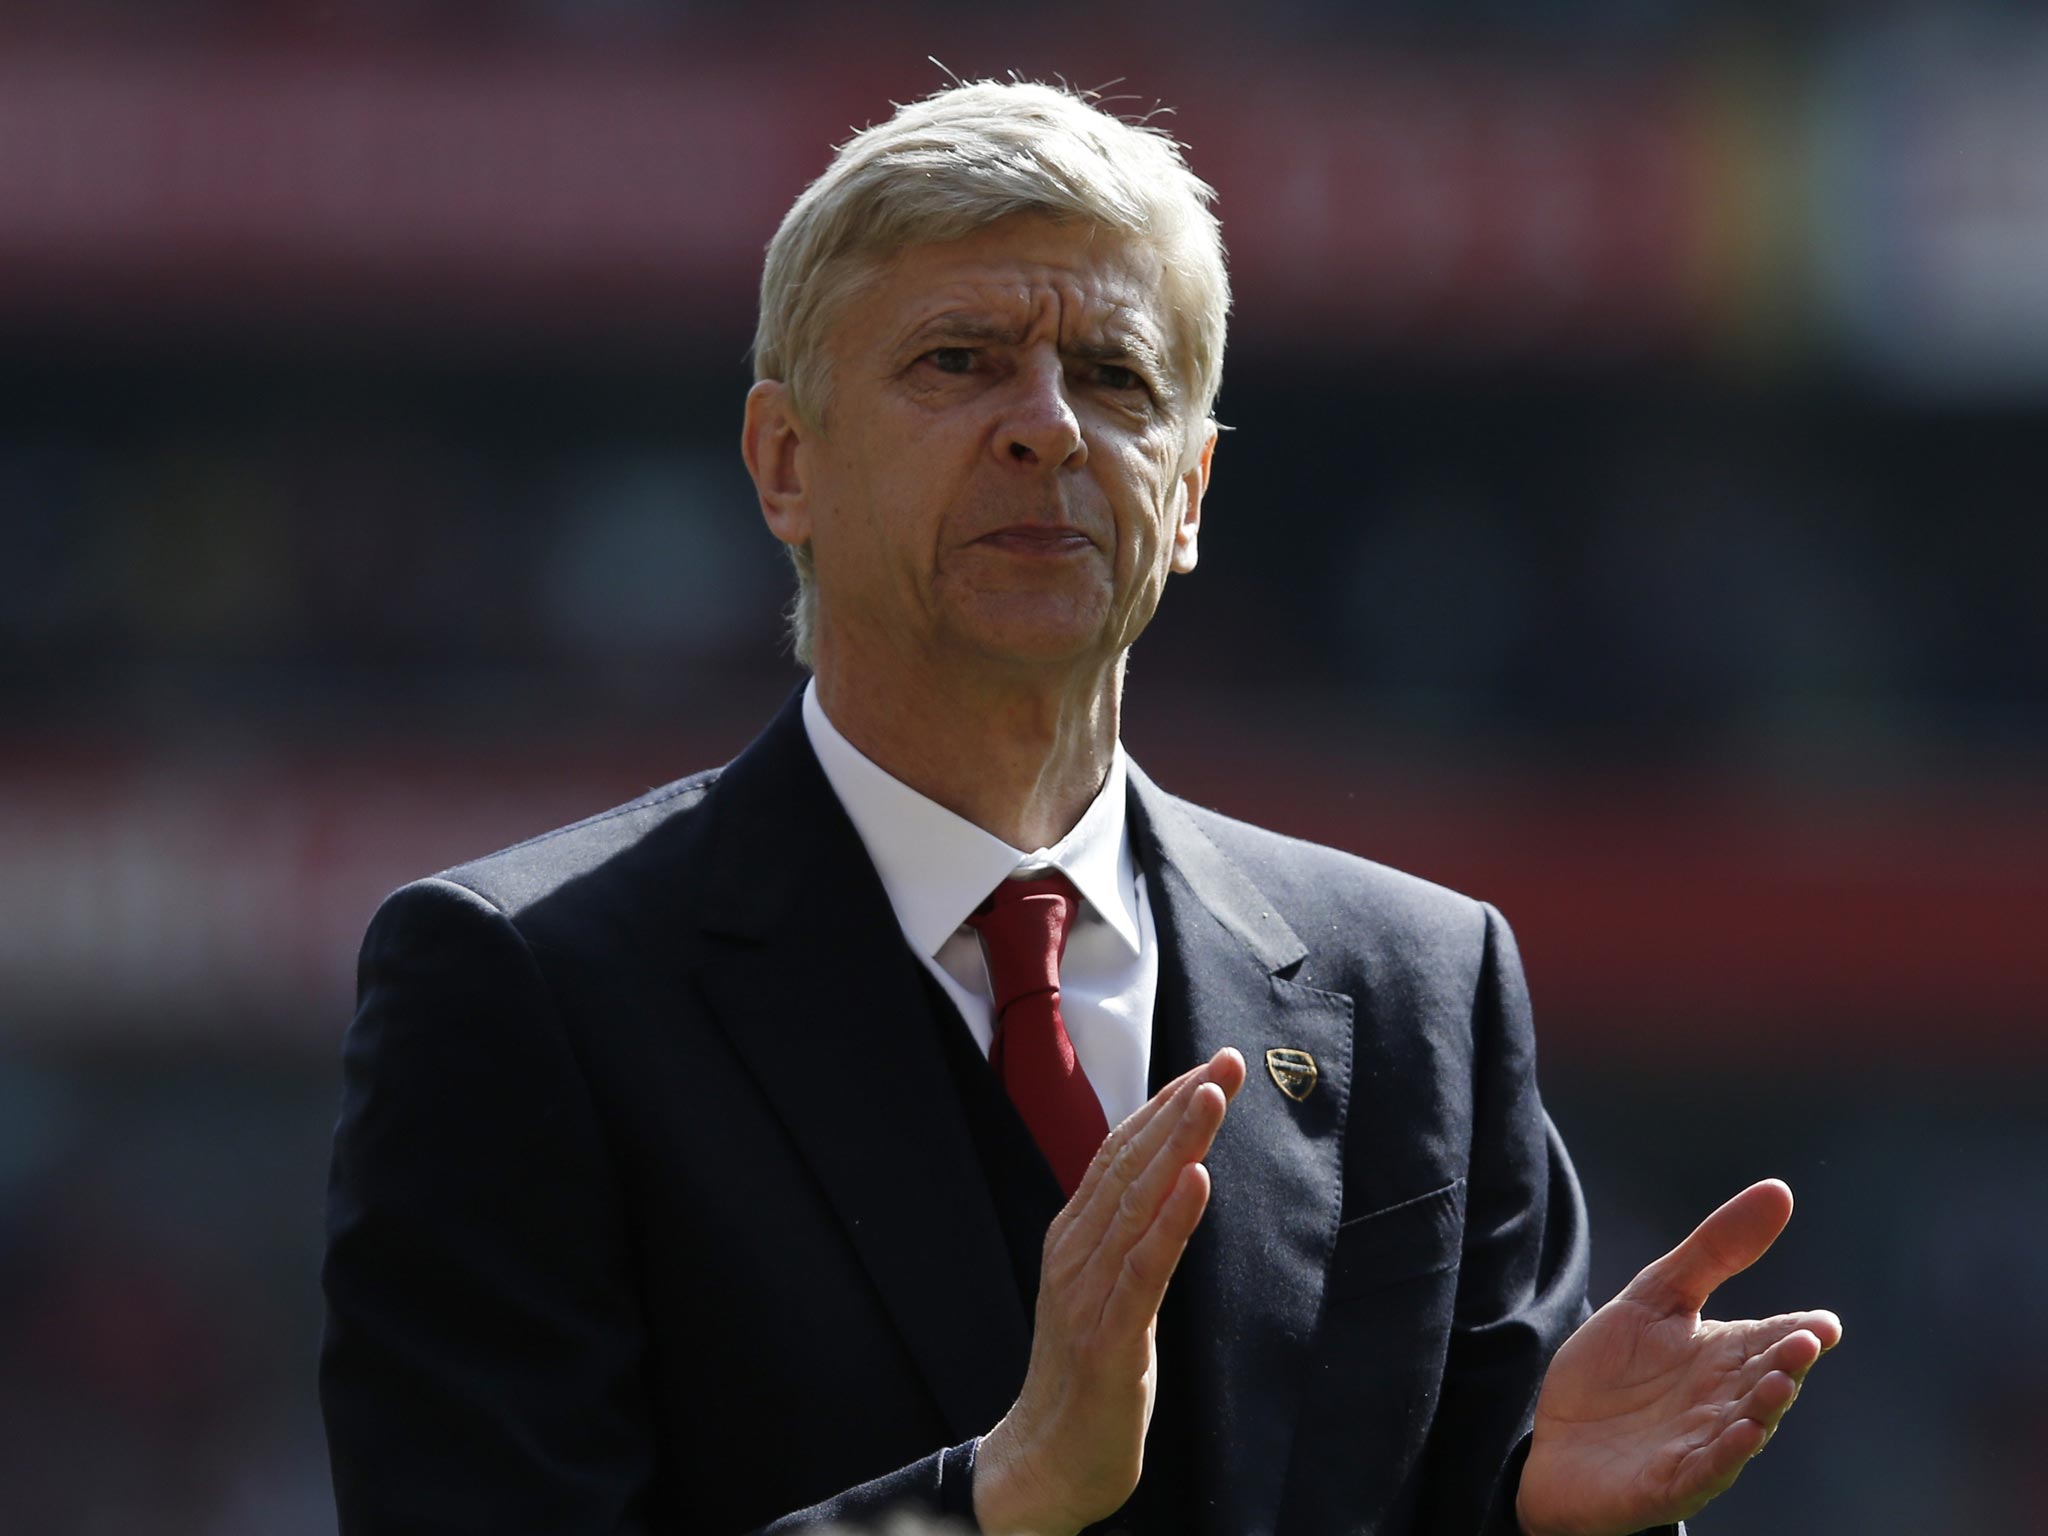 Arsene Wenger looks ahead to the FA Cup final